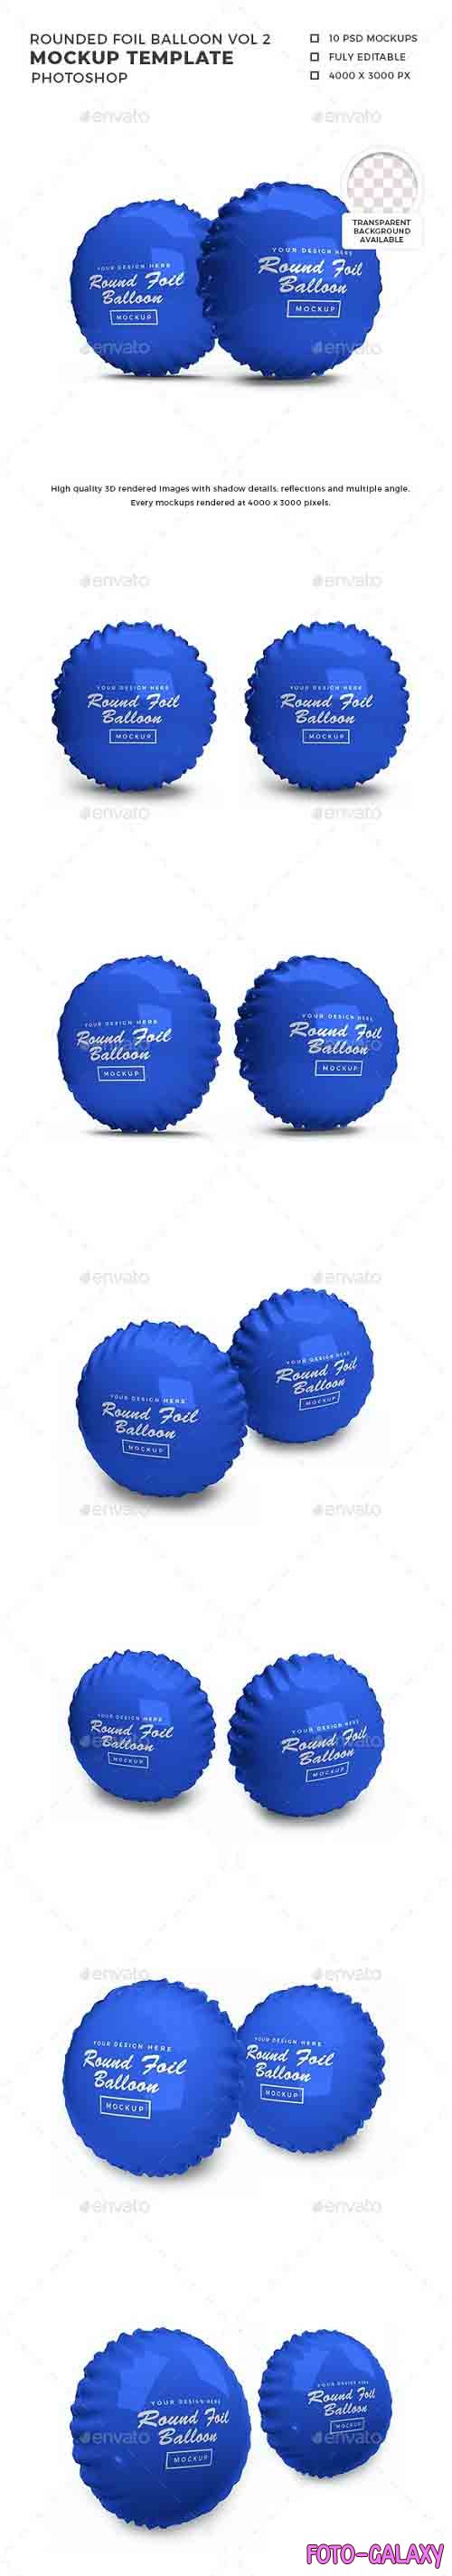 Rounded Foil Balloon 3D Mockup Template Vol 2 - 32557867